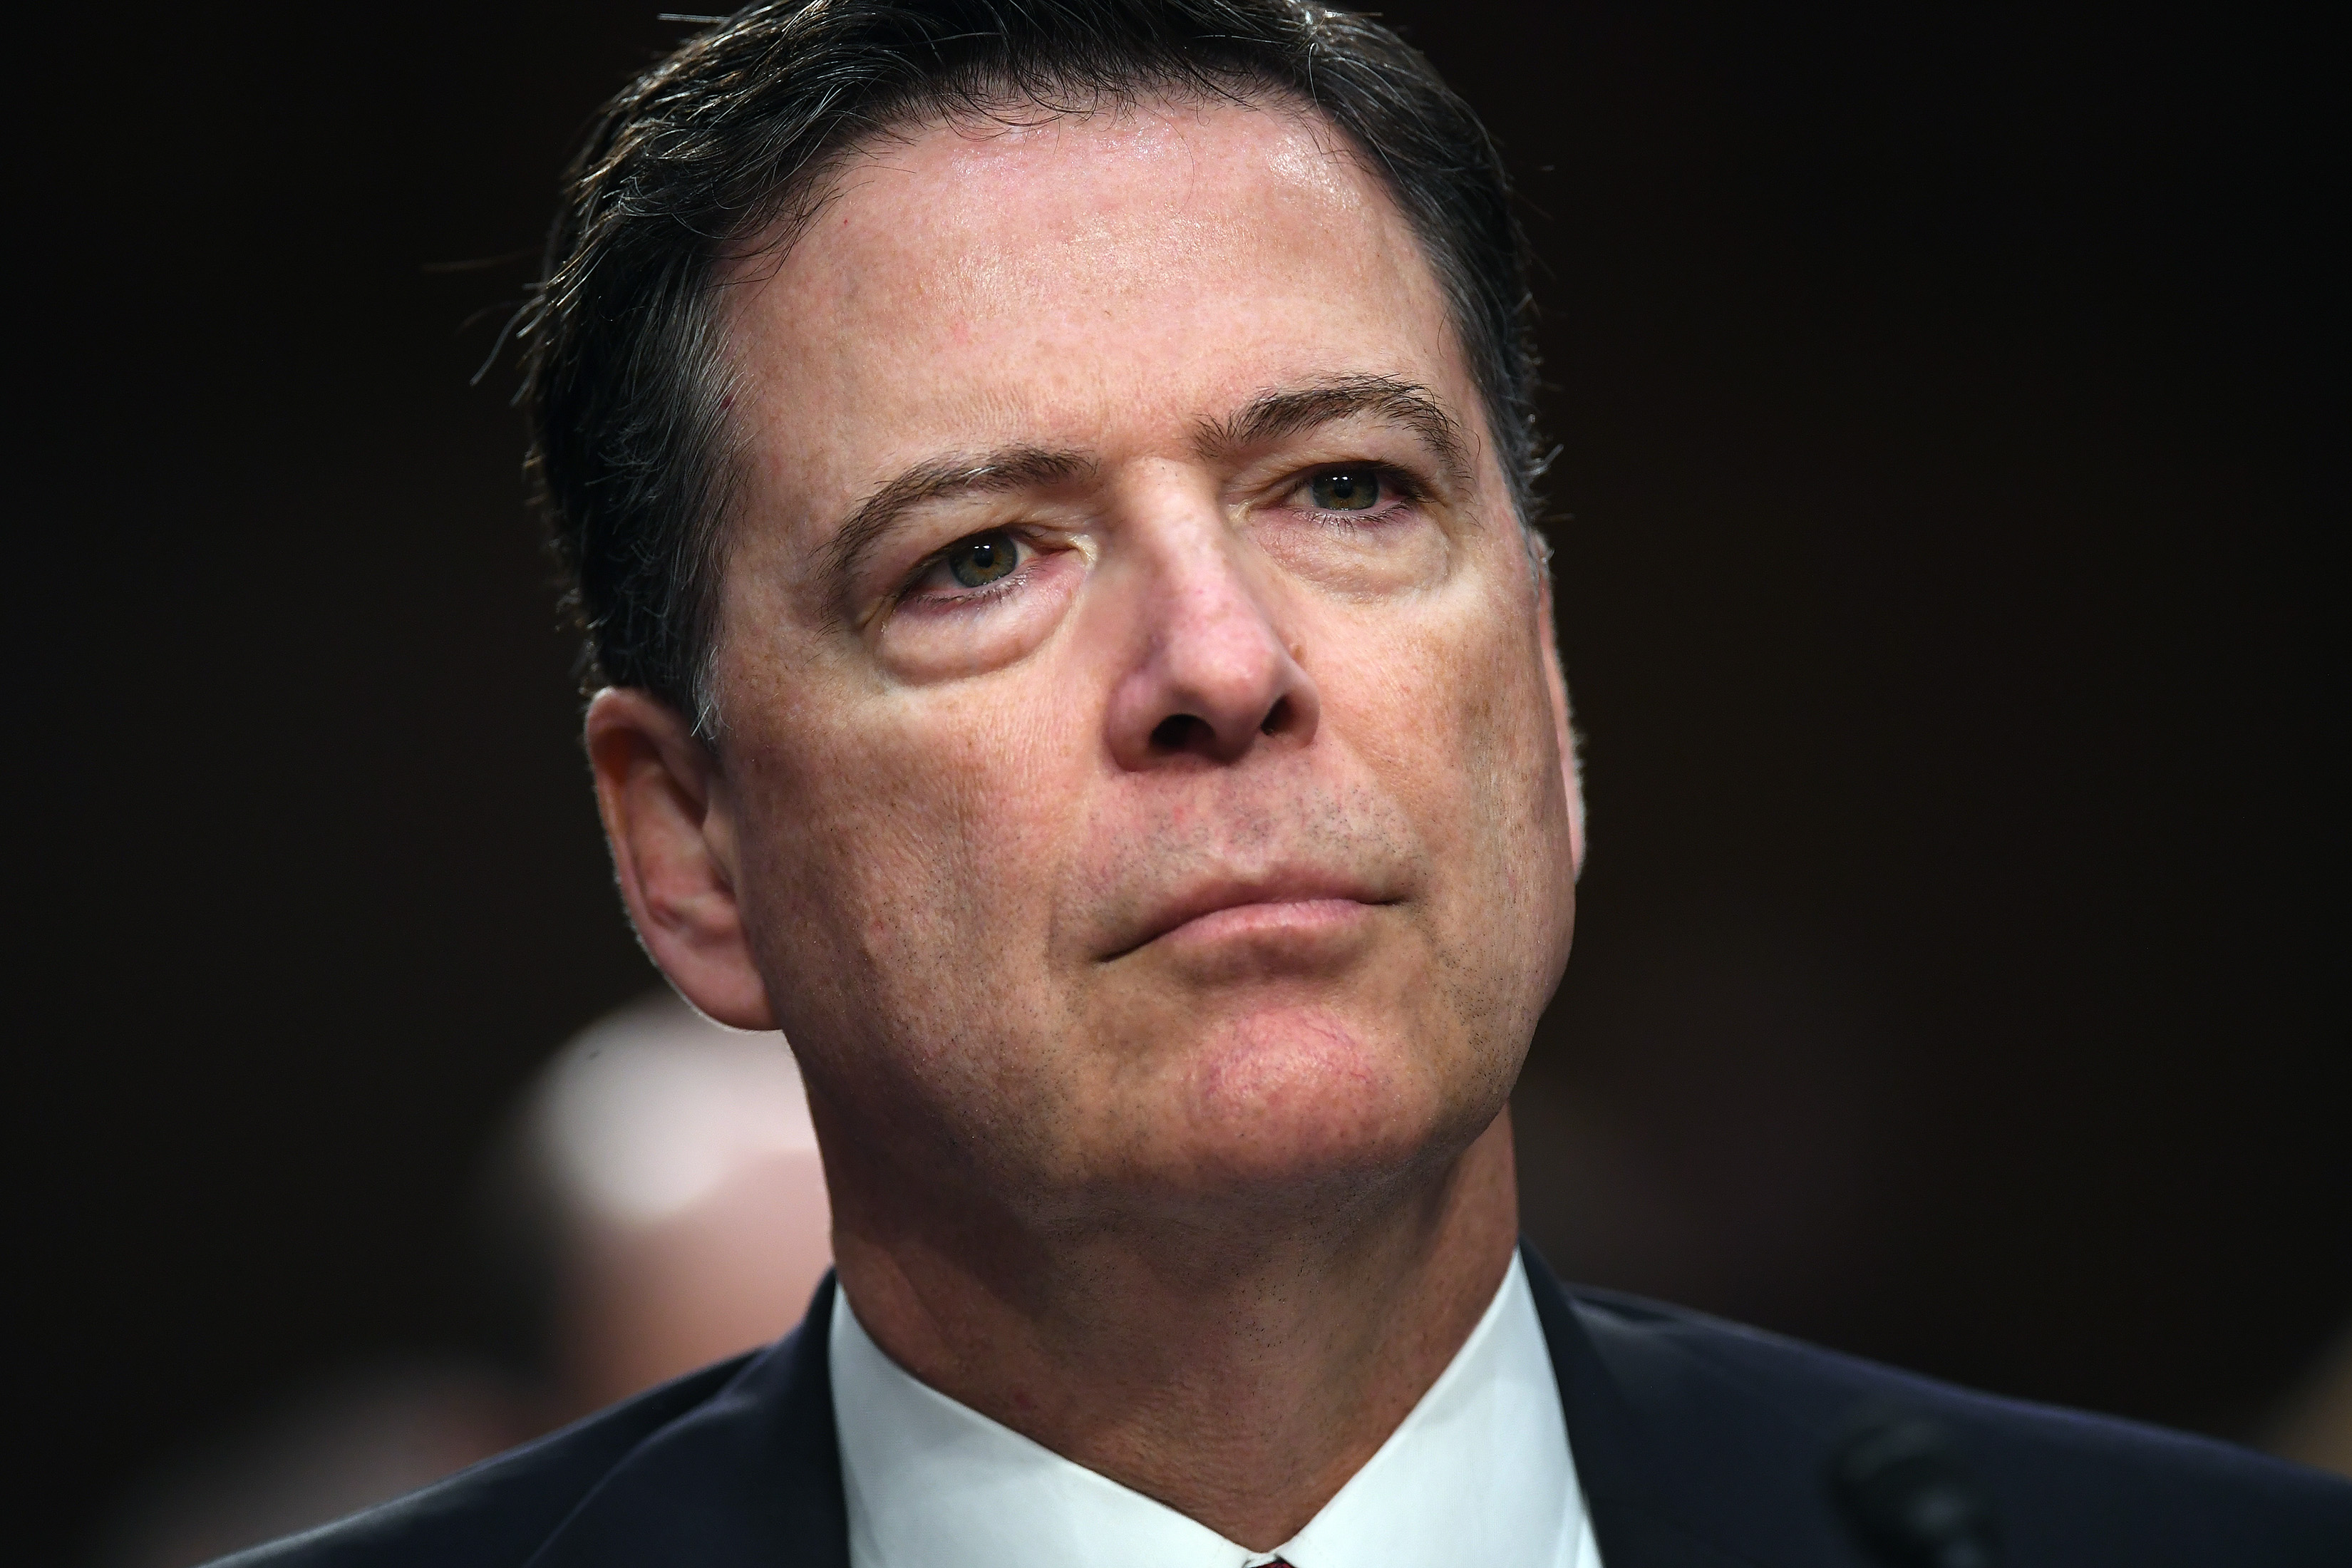 James Comey's Book A Higher Loyalty Isn't Out Until Tuesday. But It's Already One of 2018's Best Sellers